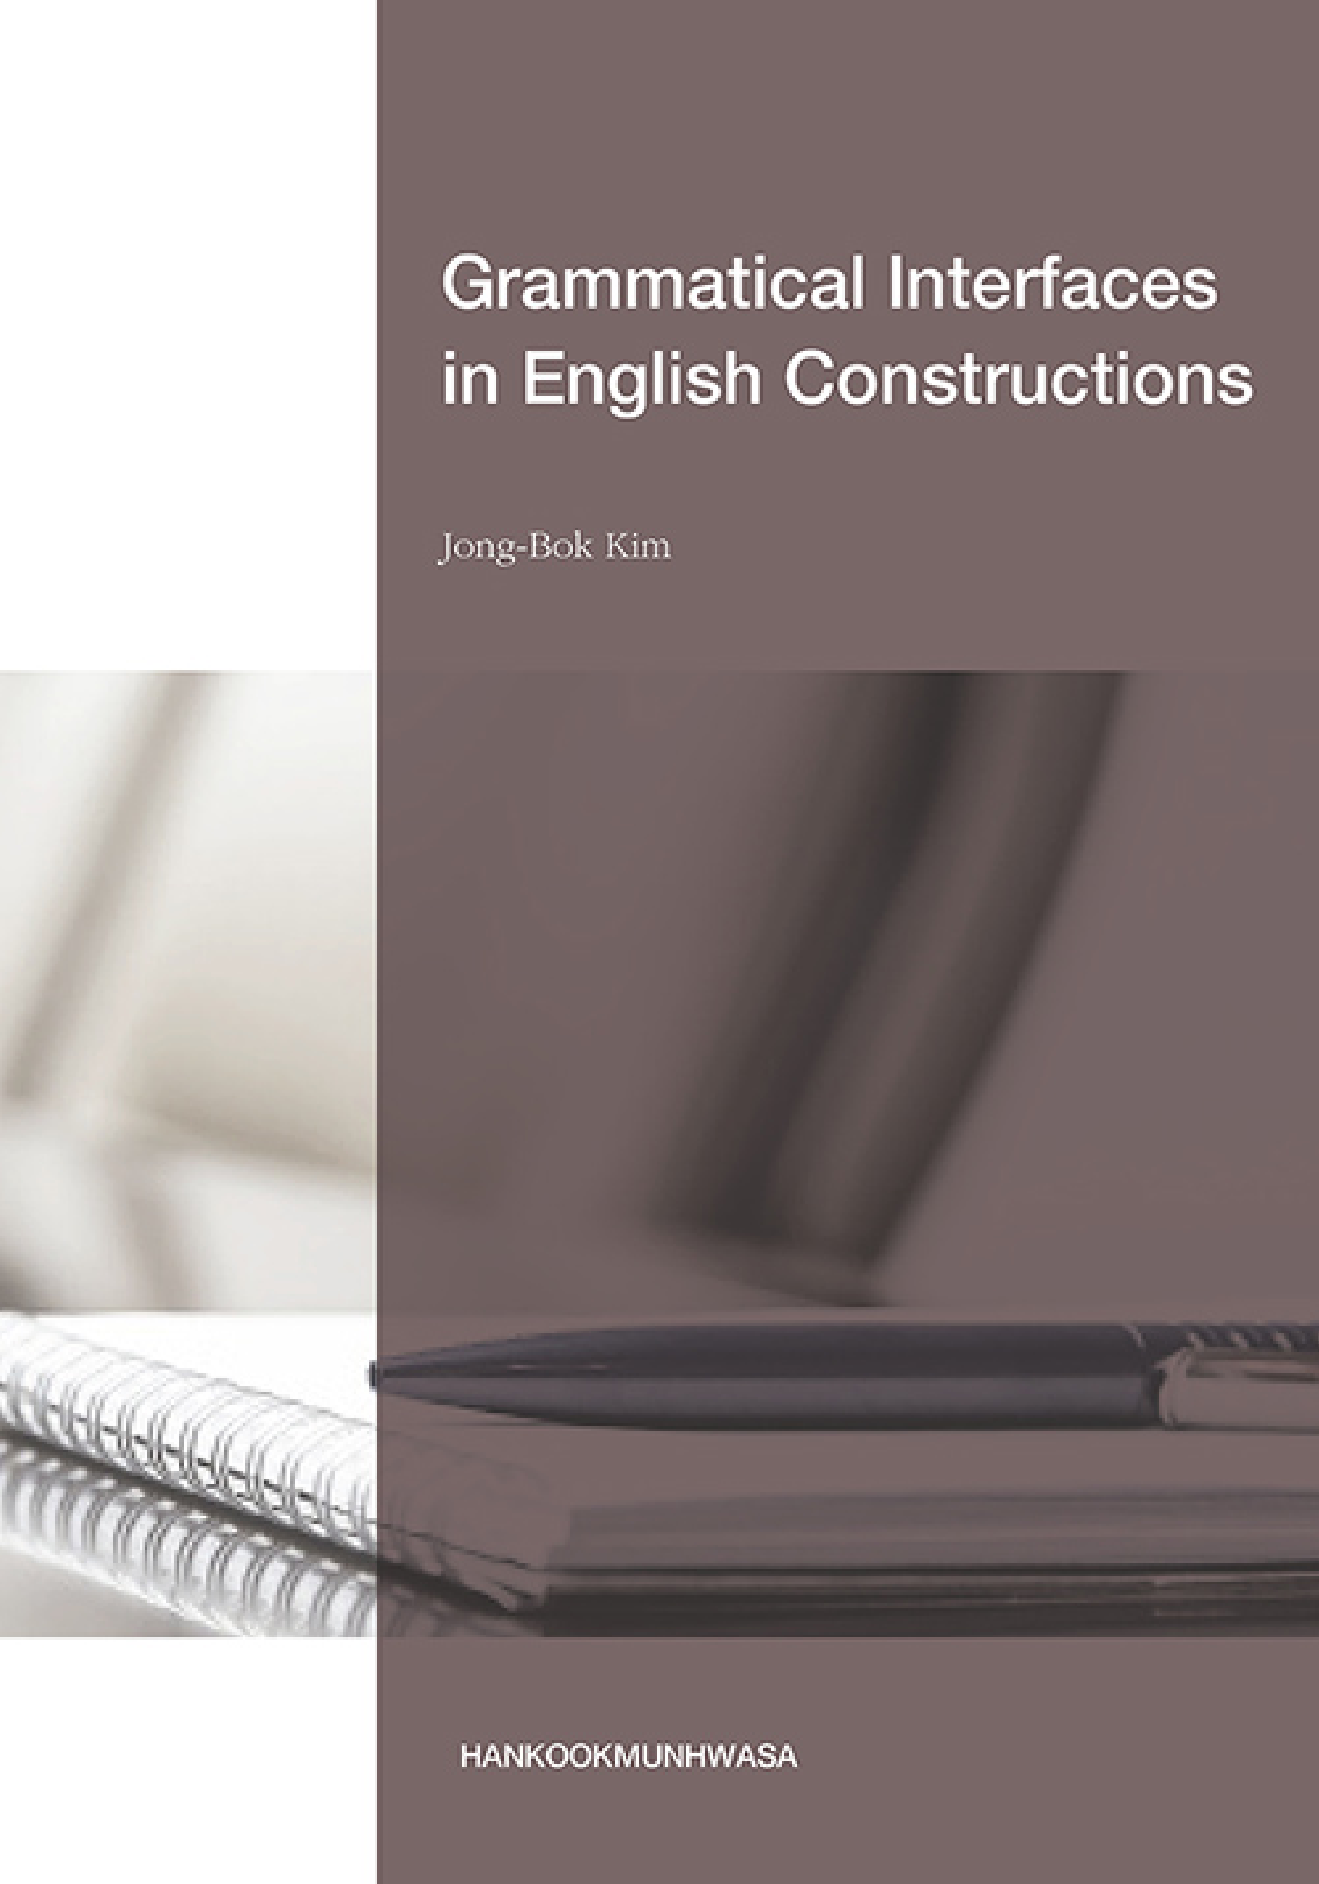 Grammatical Interfaces in English Constructions